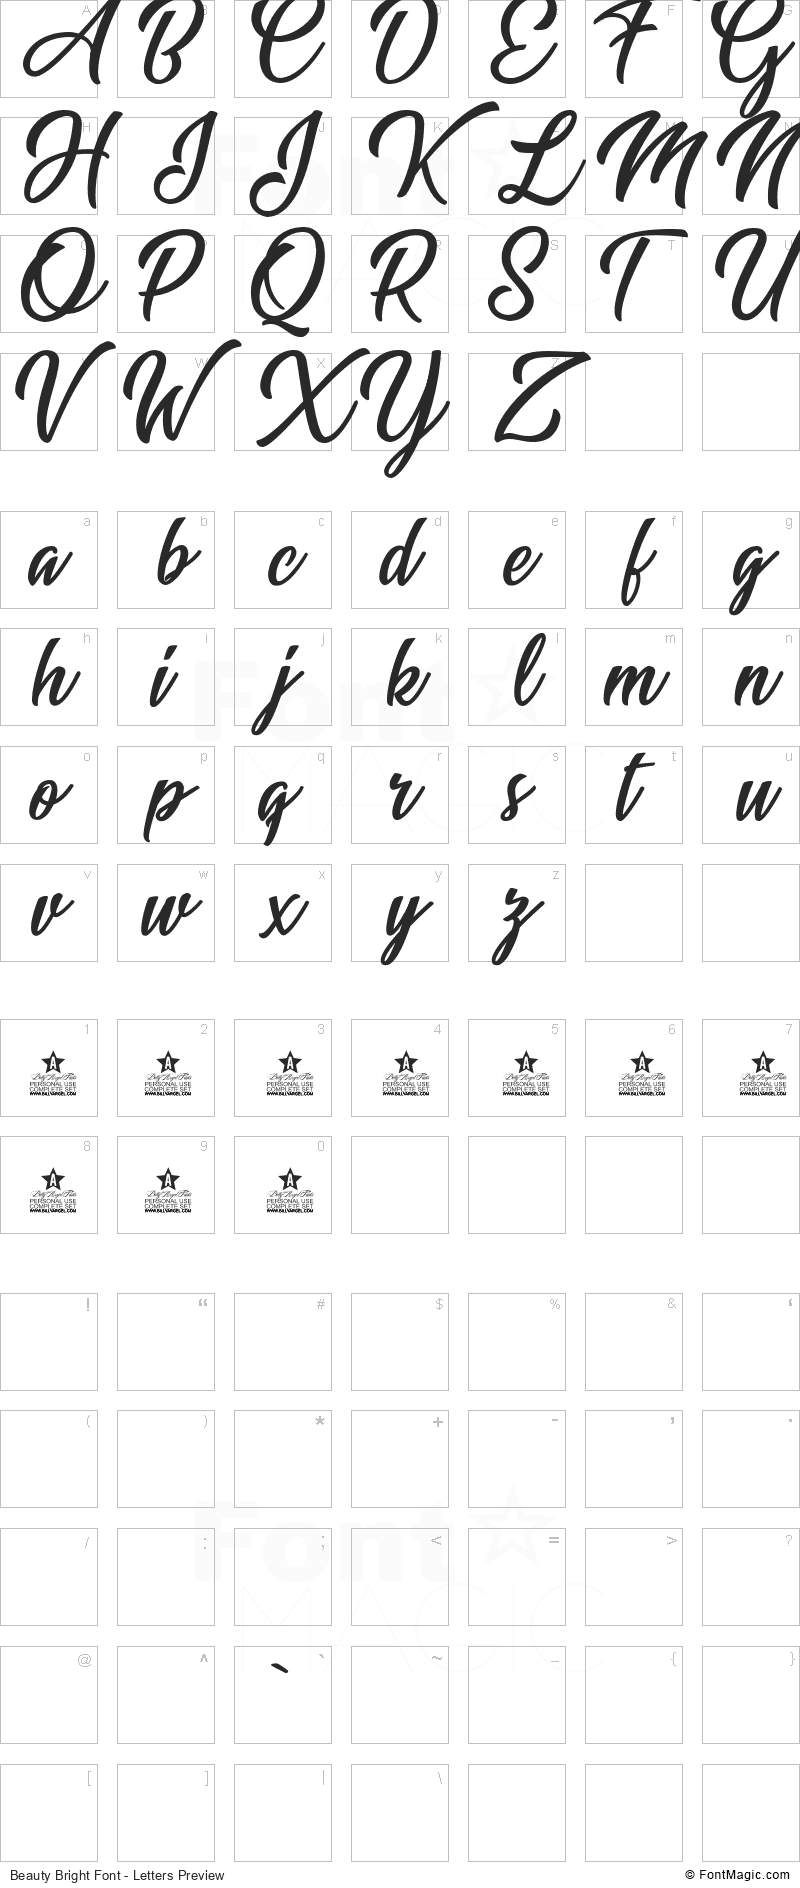 Beauty Bright Font - All Latters Preview Chart